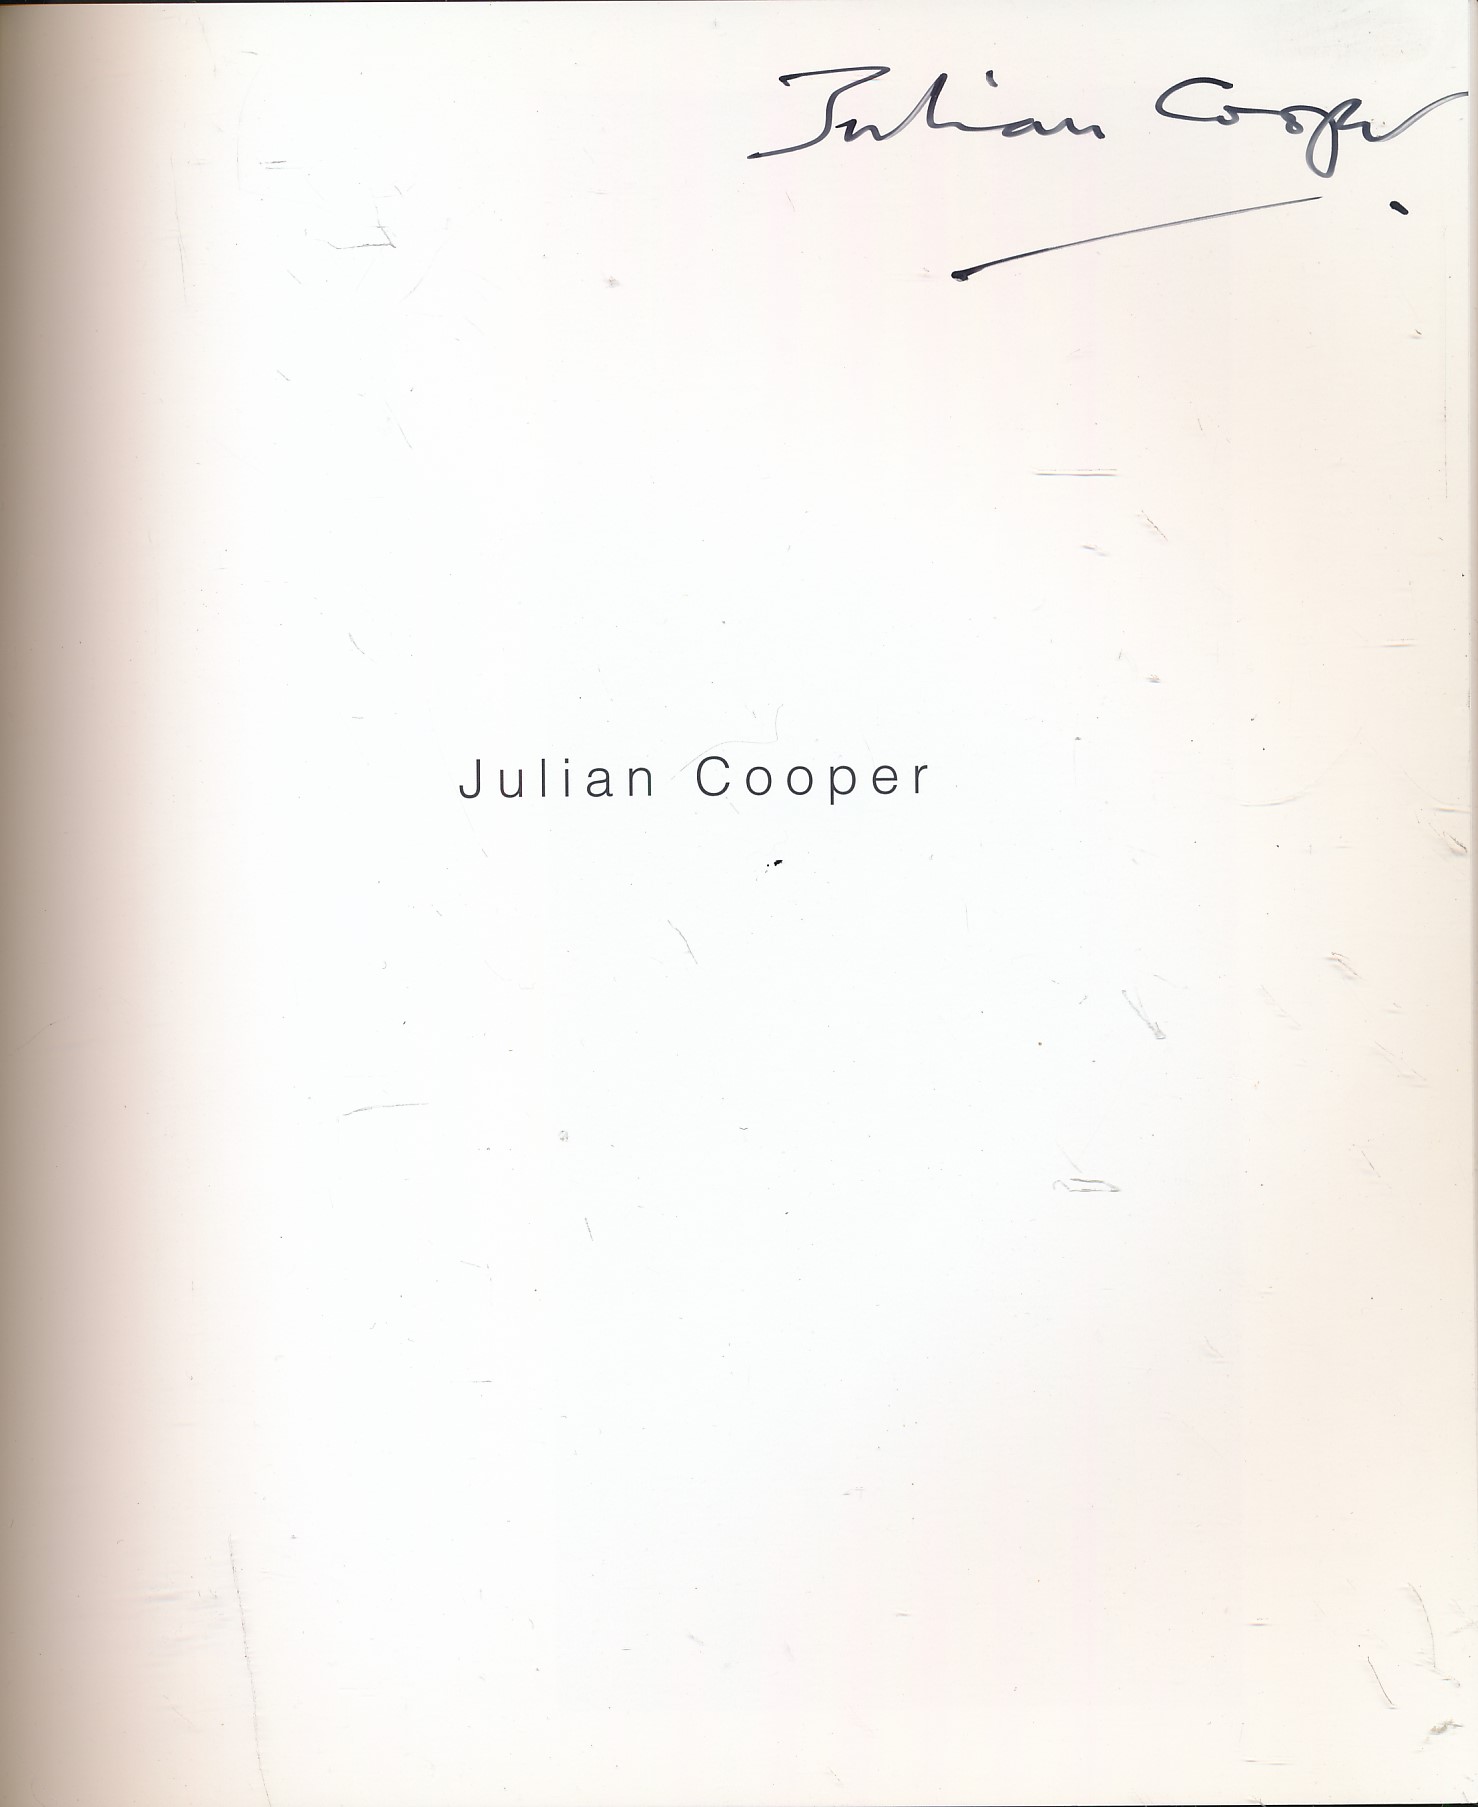 Julian Cooper. Cliffs of Fall. Paintings 2004. Signed Copy.